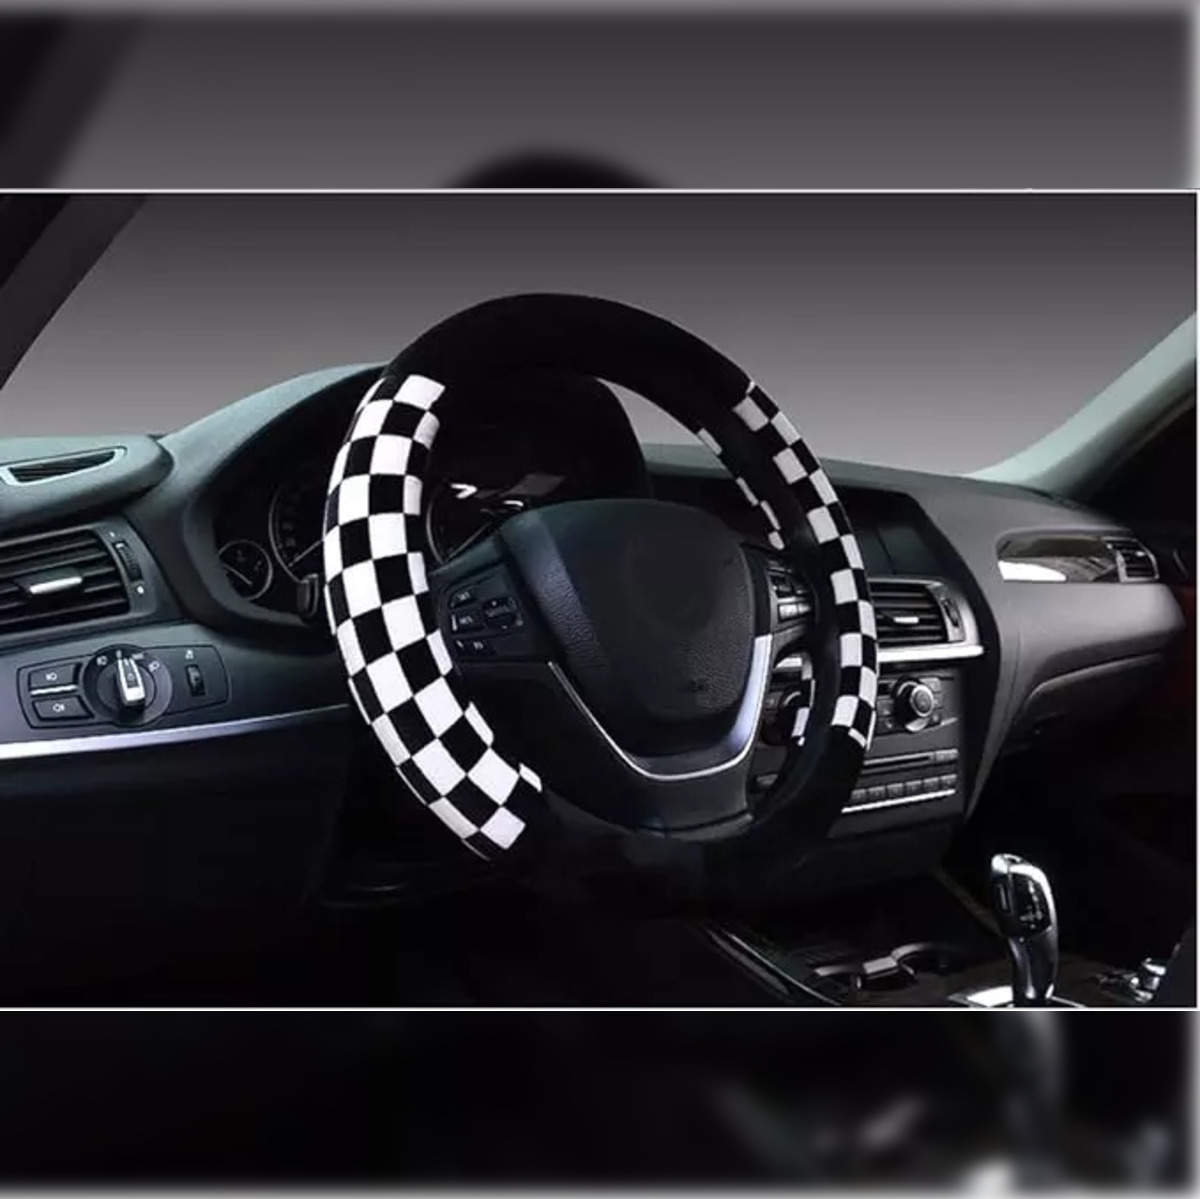 Steering wheel covers: 6 Best Steering Wheel Covers for your Car